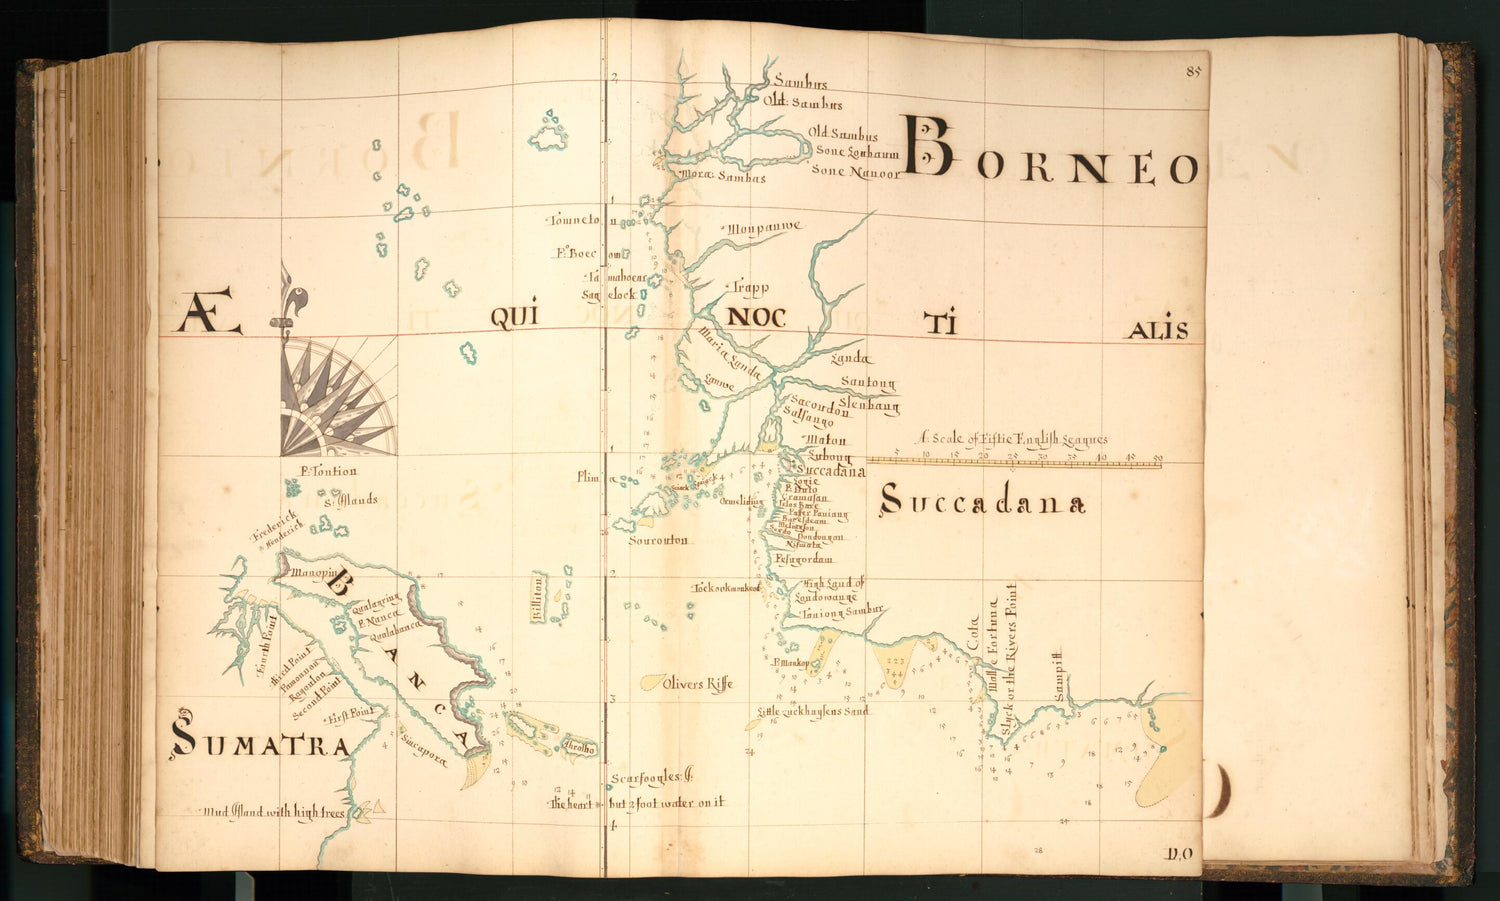 This old map of 85) Sumatra, Banca, Borneo, Succadana from Buccaneer Atlas from 1690 was created by William Hacke in 1690